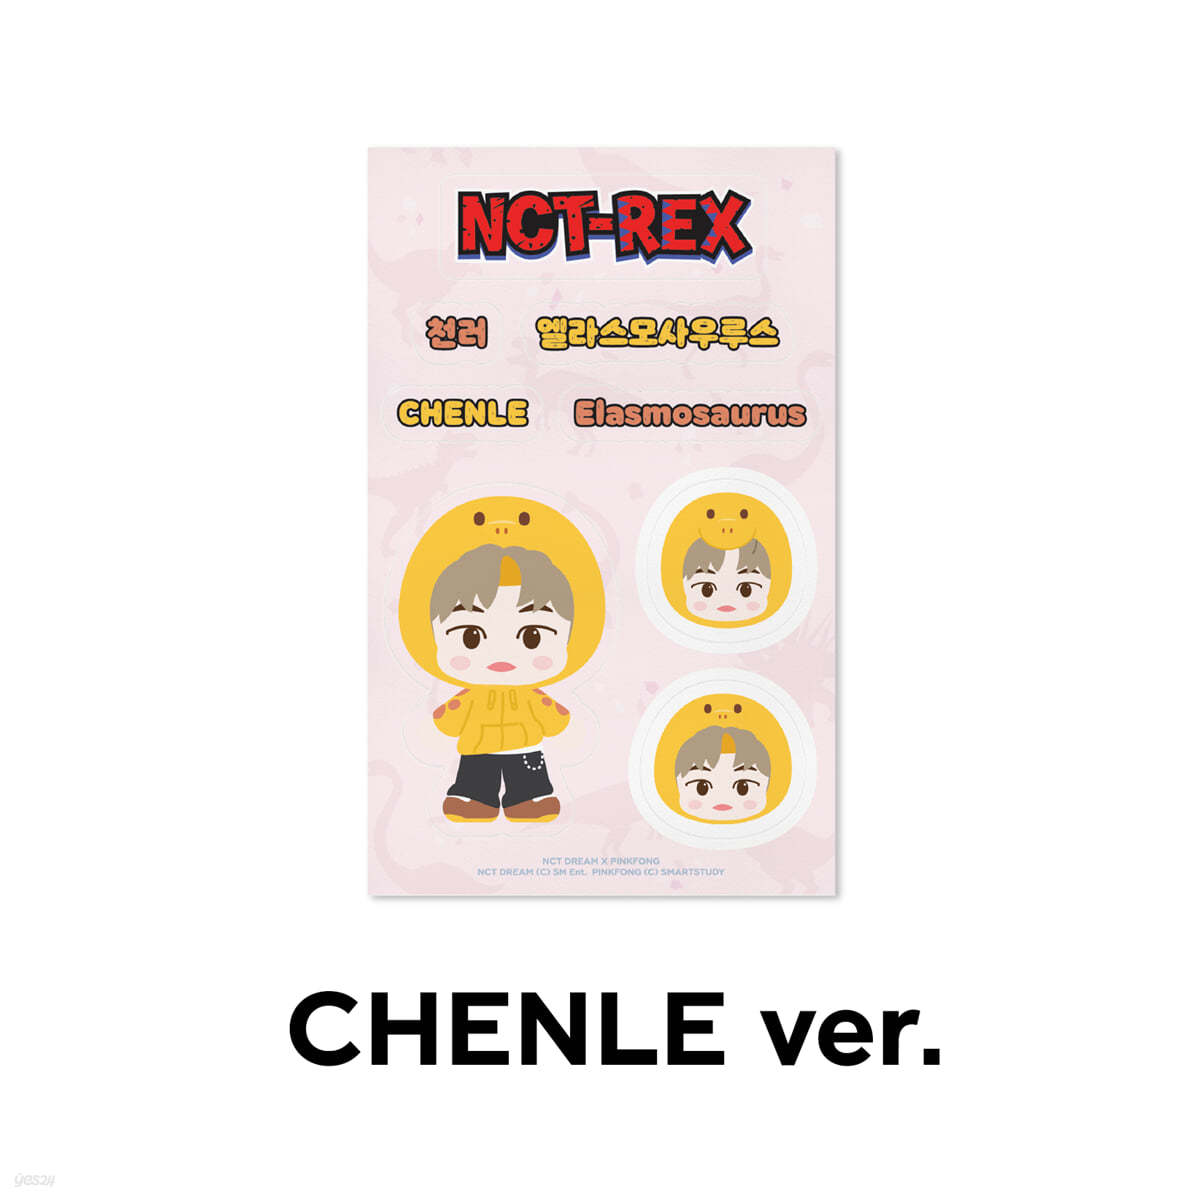 [CHENLE] REMOVABLE LUGGAGE STICKER - NCT DREAM X PINKFONG 